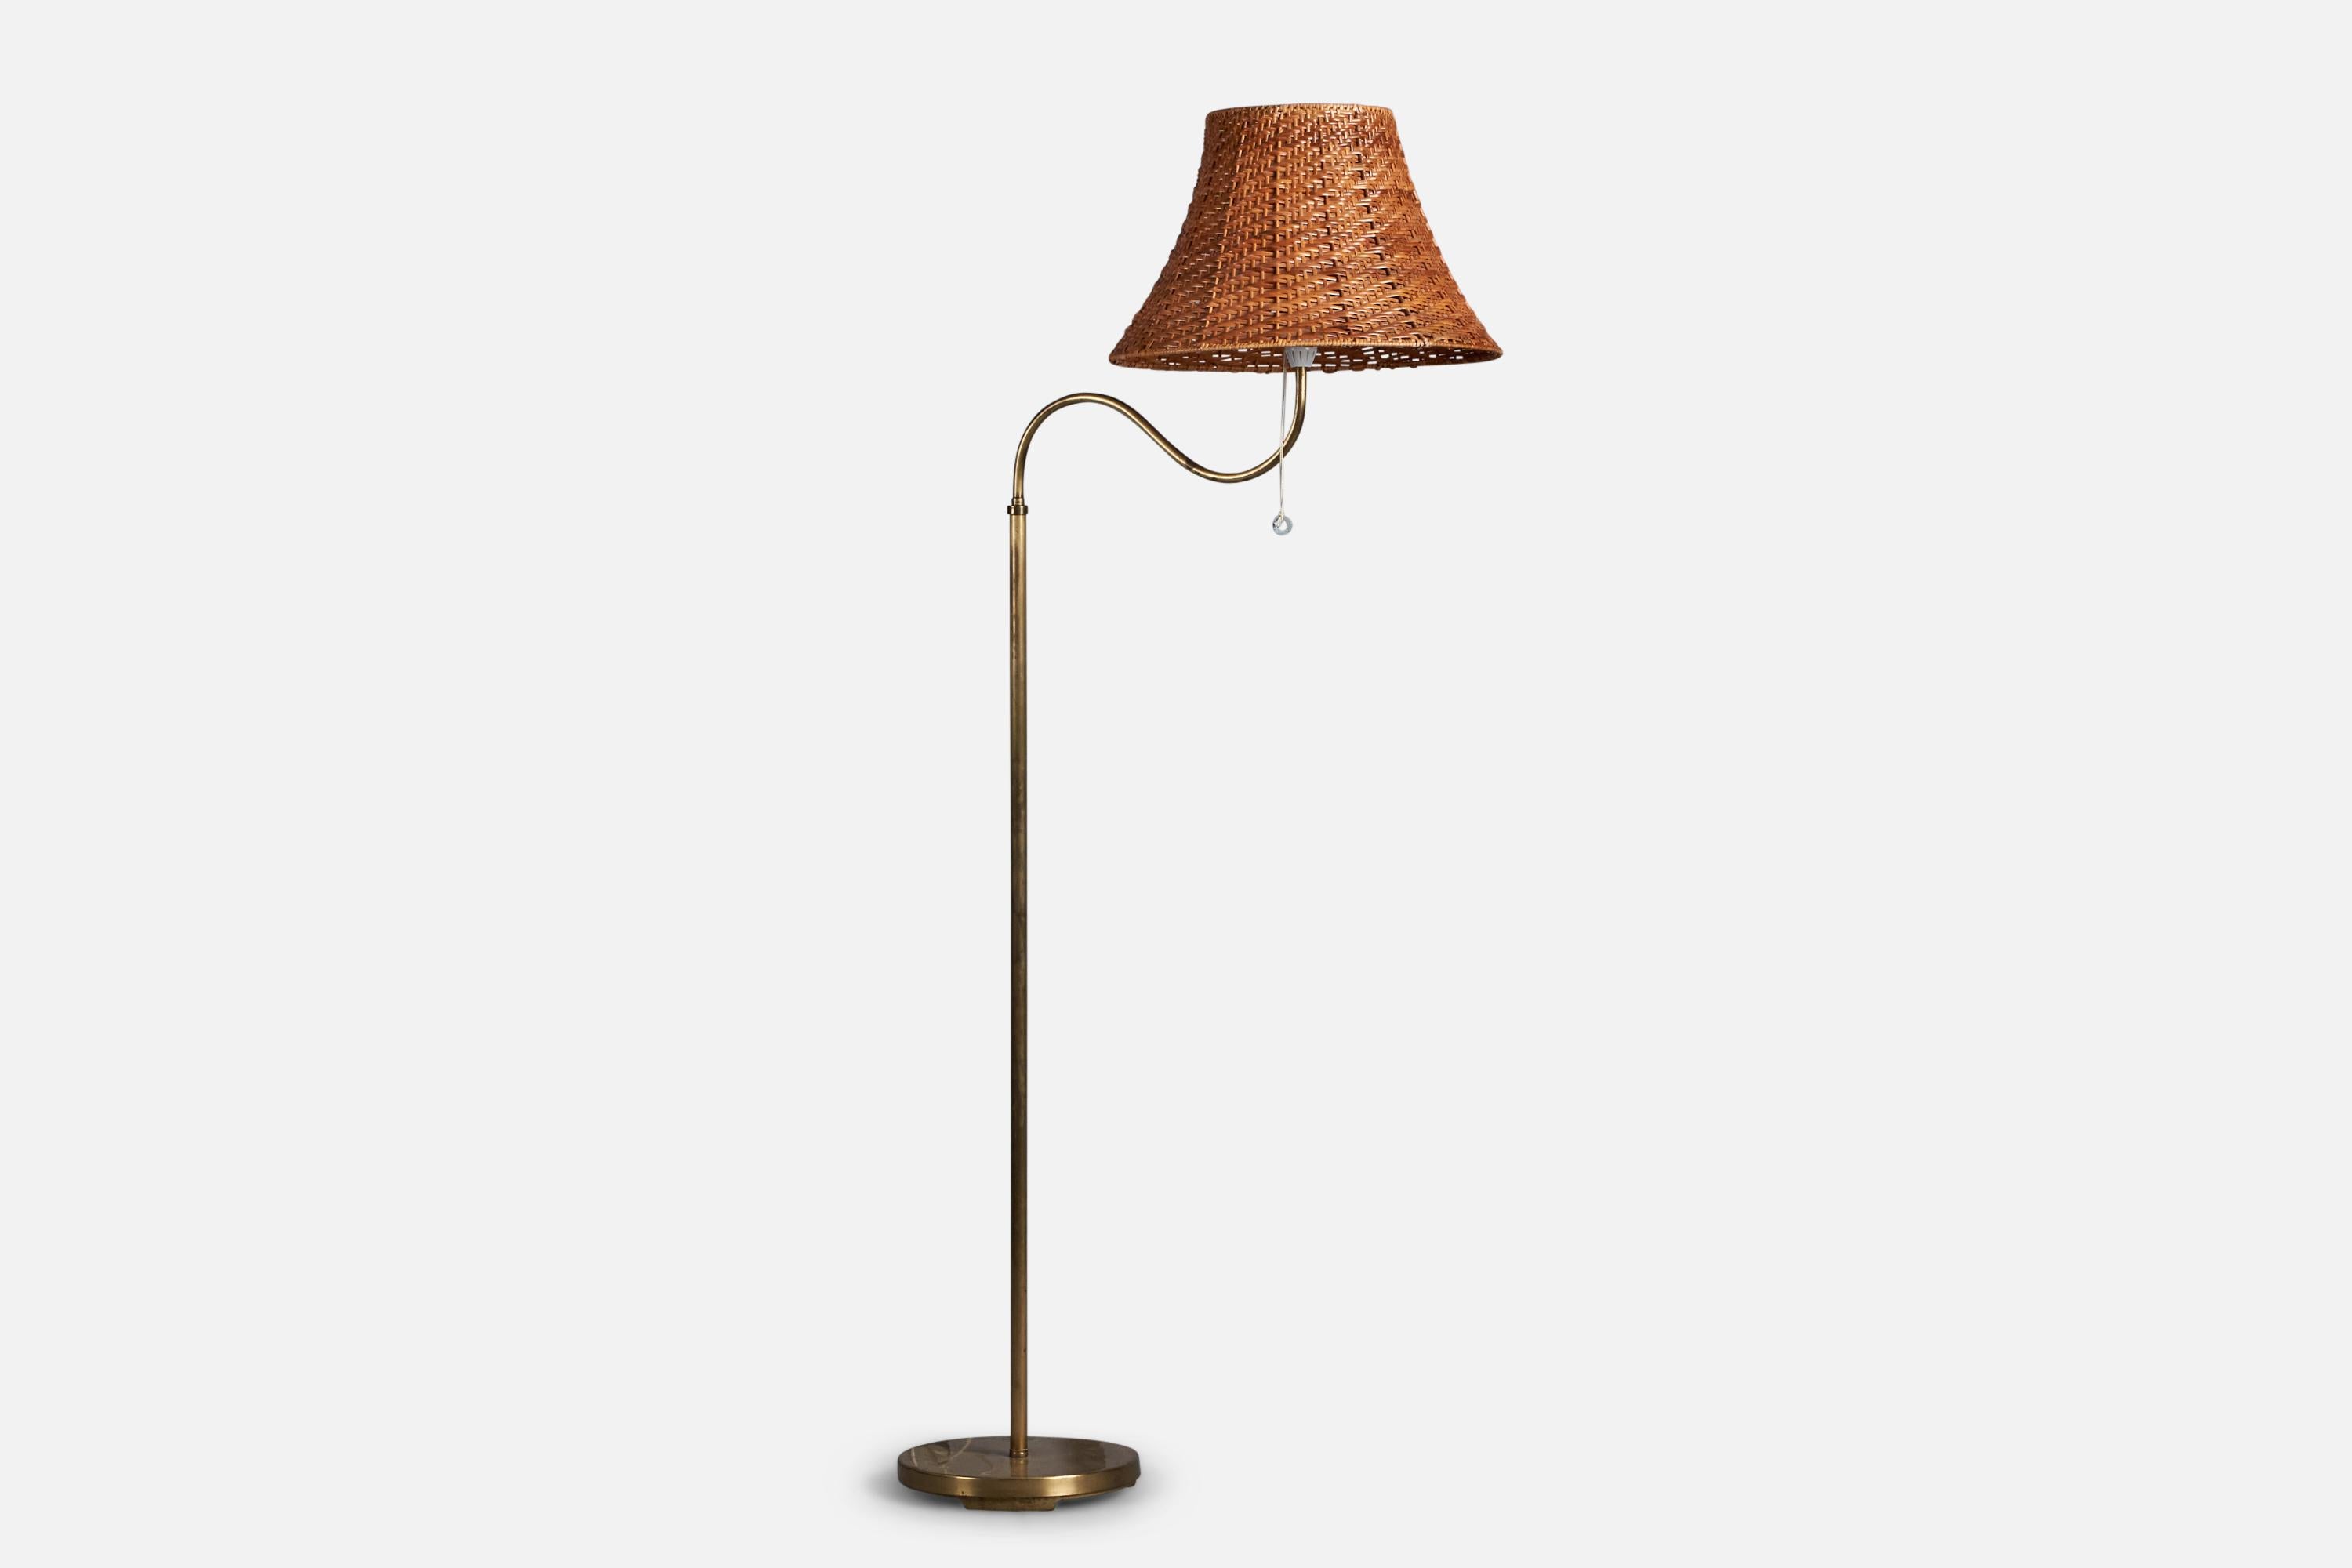 An adjustable brass and rattan floor lamp attributed to Böhlmarks, Sweden, 1940s.

Overall Dimensions (inches): 62” H x 17” W x 30” D
Bulb Specifications: E-26 Bulb
Number of Sockets: 1